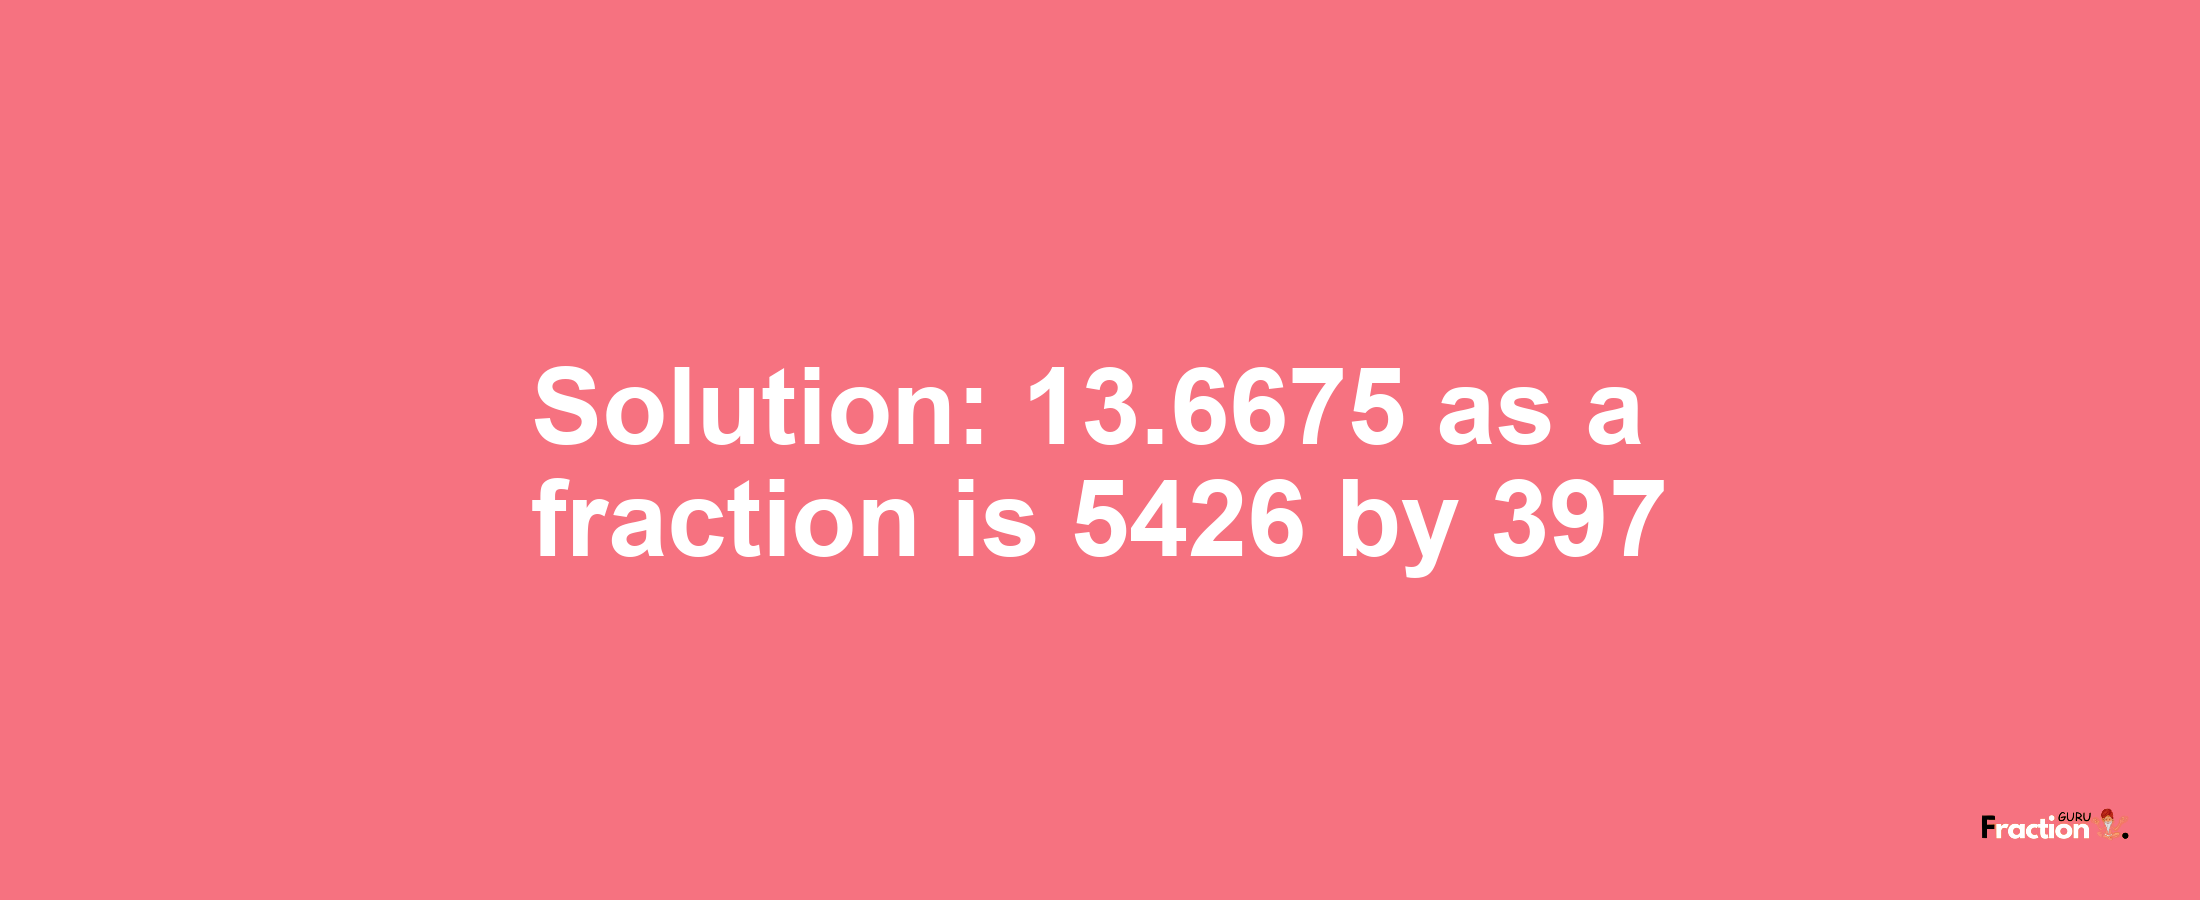 Solution:13.6675 as a fraction is 5426/397